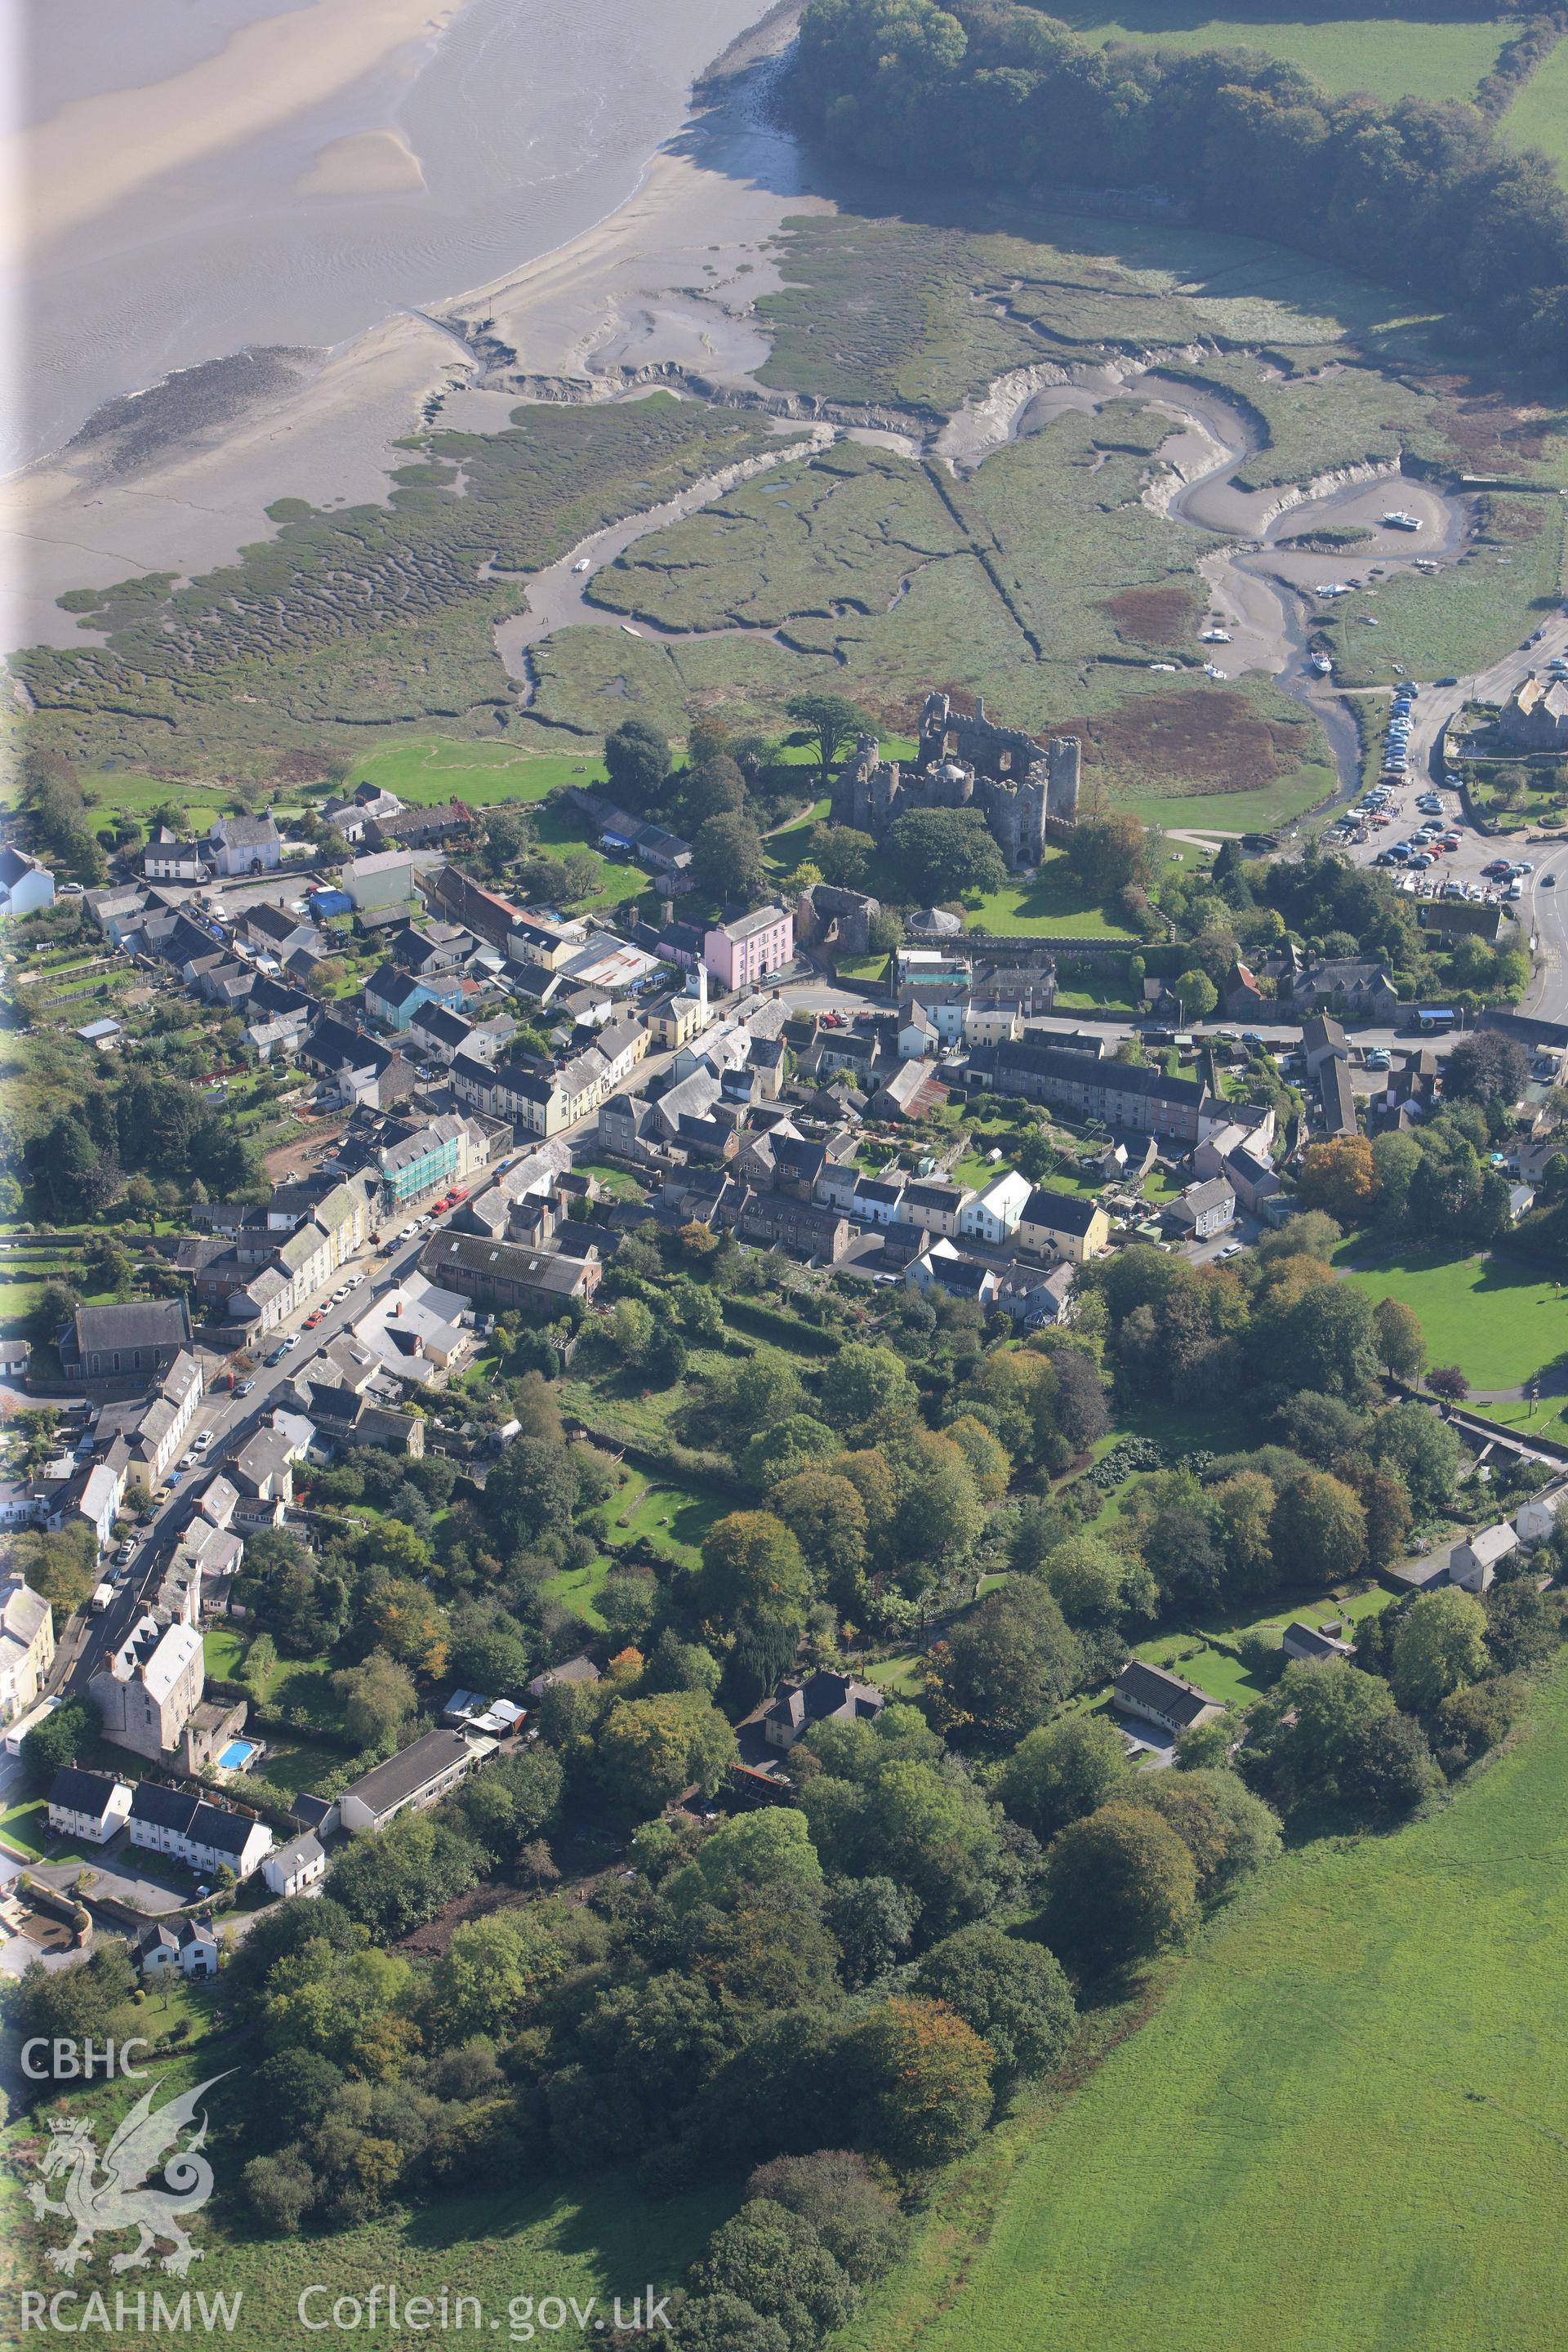 RCAHMW colour oblique photograph of Laugharne, viewed from the north-west, looking seaward towards the castle. Taken by Toby Driver and Oliver Davies on 28/09/2011.